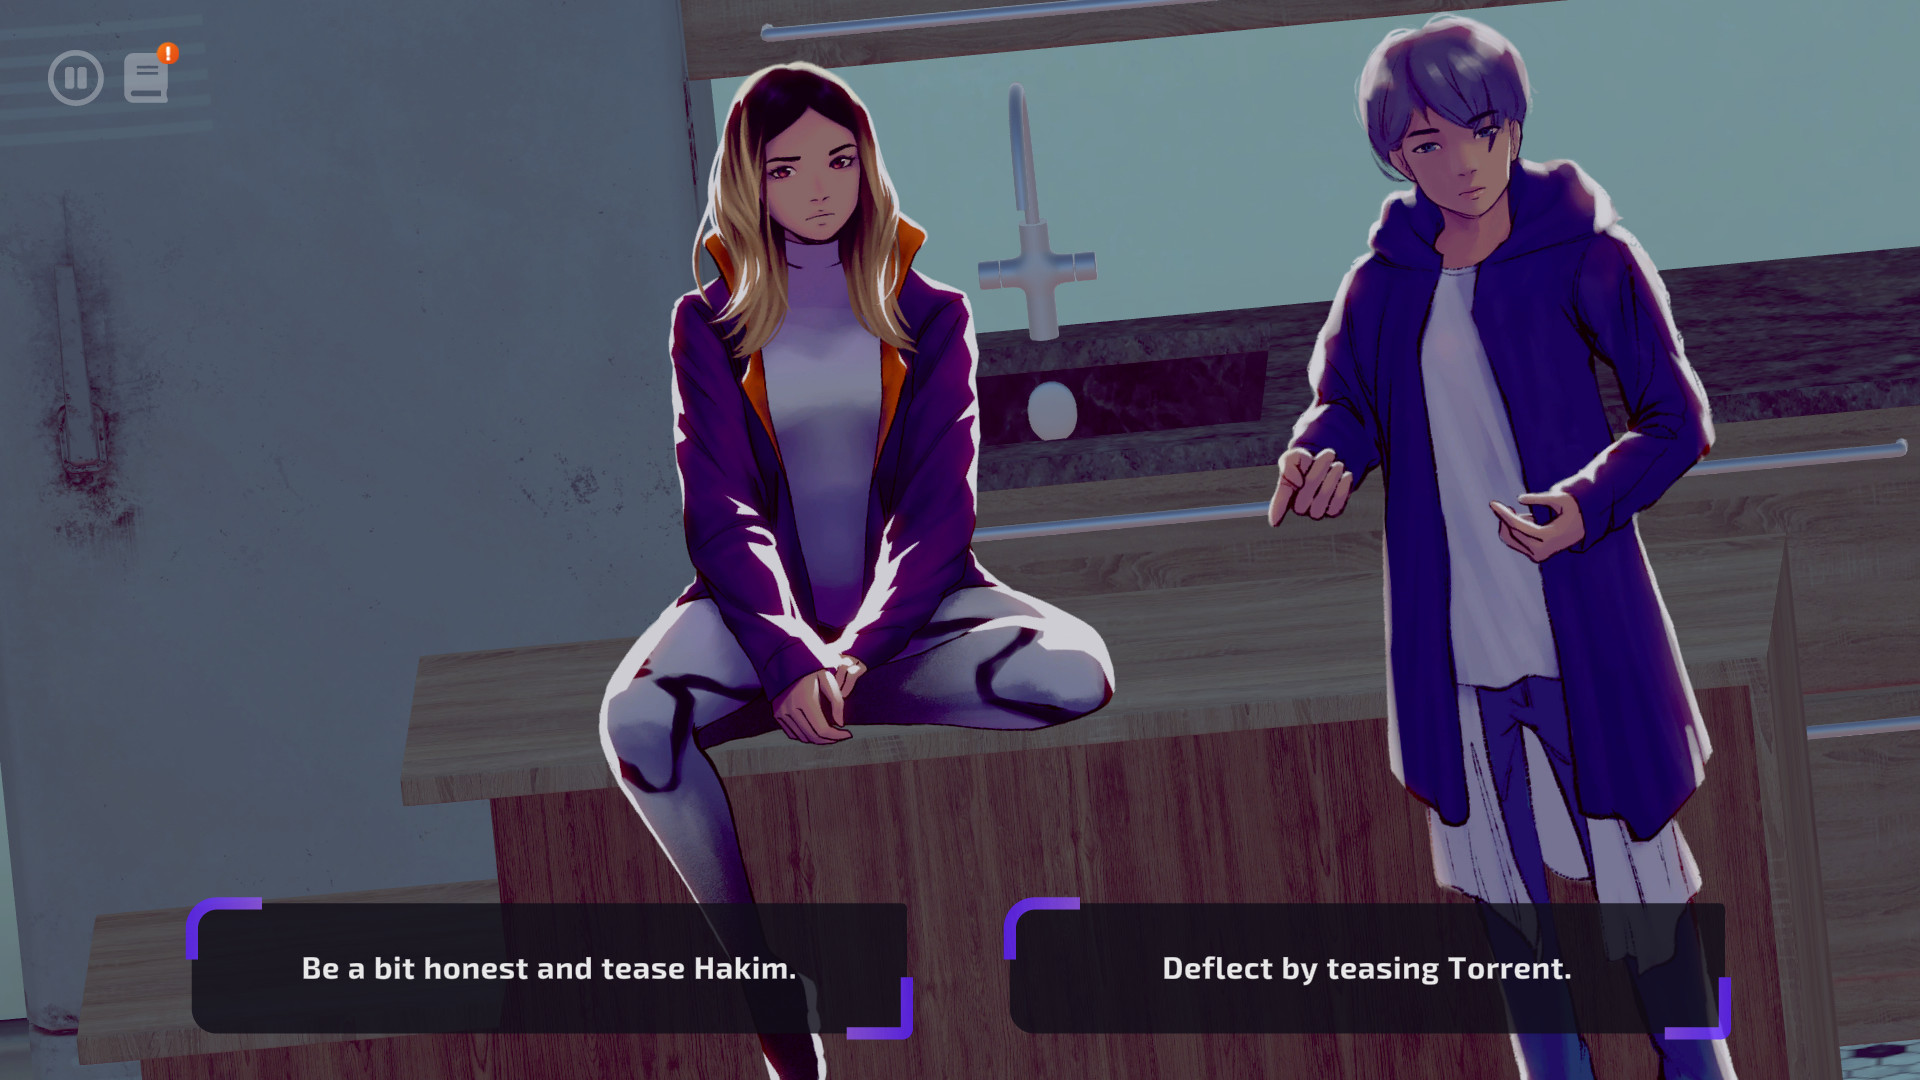 A screenshot from Solace State. On the left is a girl with blond hair and dark roots, and a purple jacket, sitting on a desk. To the right is a boy with a blue hair and a blue coat, standing. There are two text options: "Be a bit honest and tease Hakim" and "Deflect by teasing Torrent."